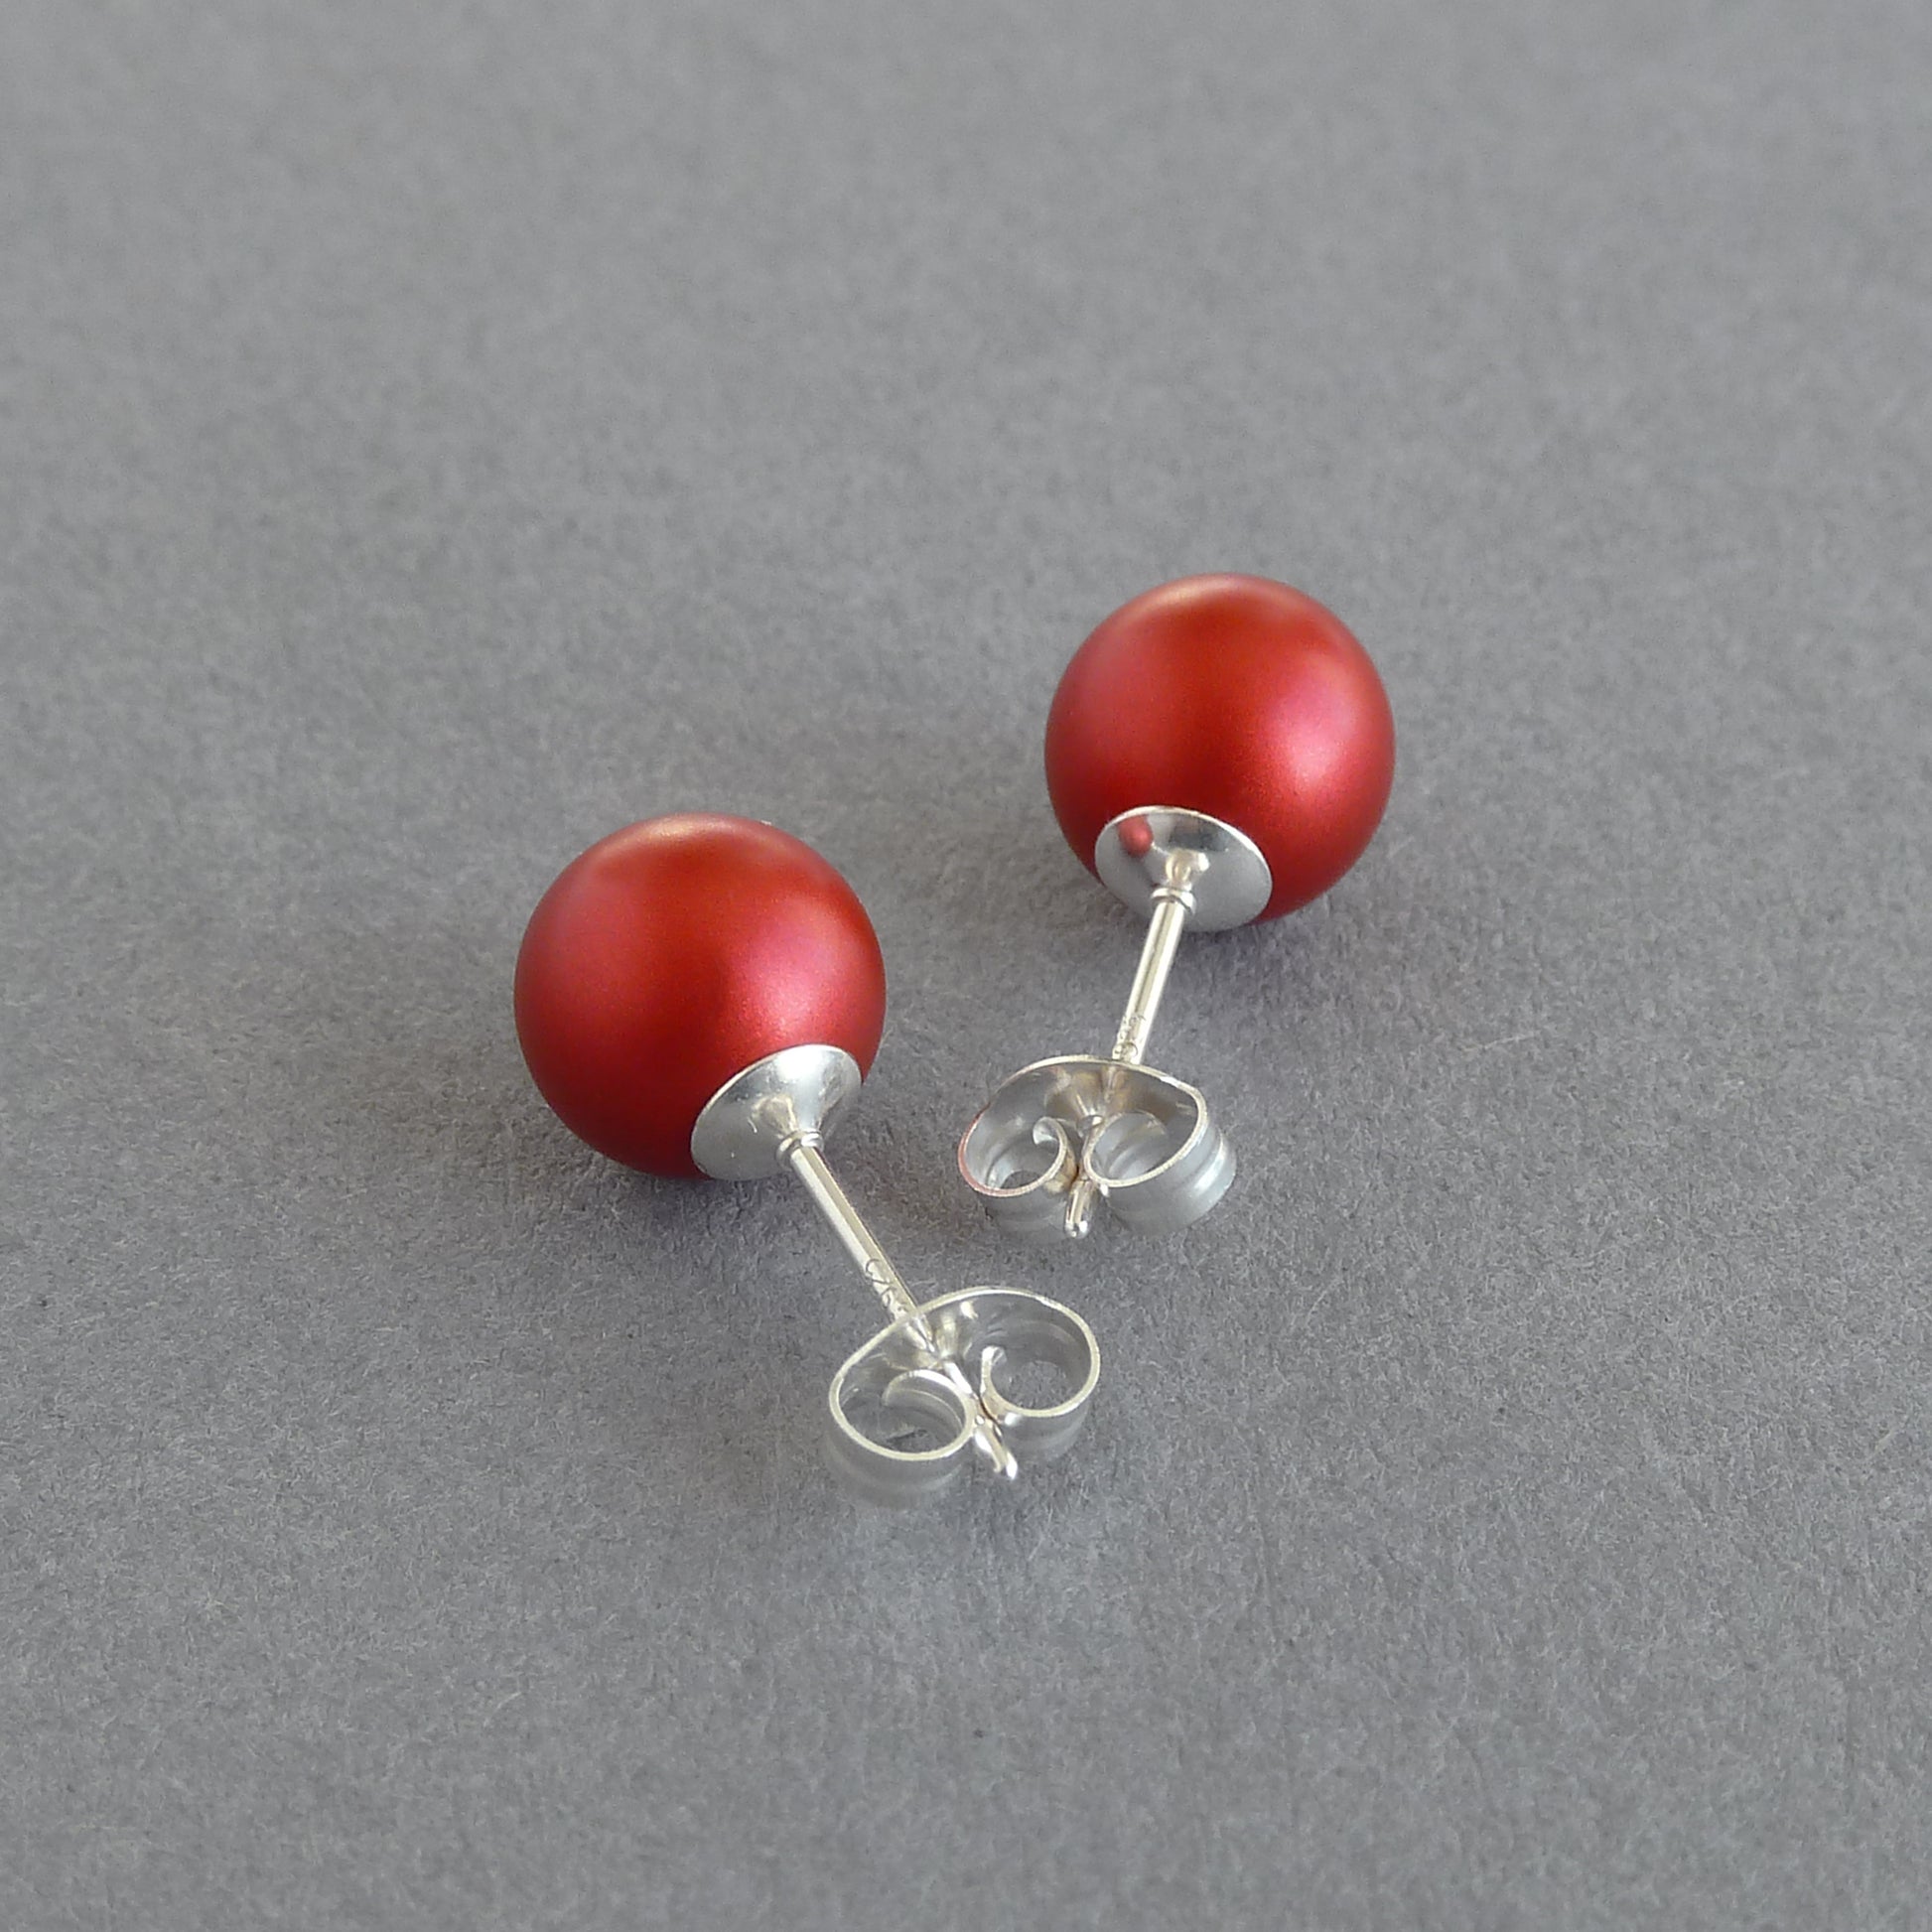 8mm Pearl Cup Earring Posts with Ear Backs, Ear Stud Components, Ear, MiniatureSweet, Kawaii Resin Crafts, Decoden Cabochons Supplies